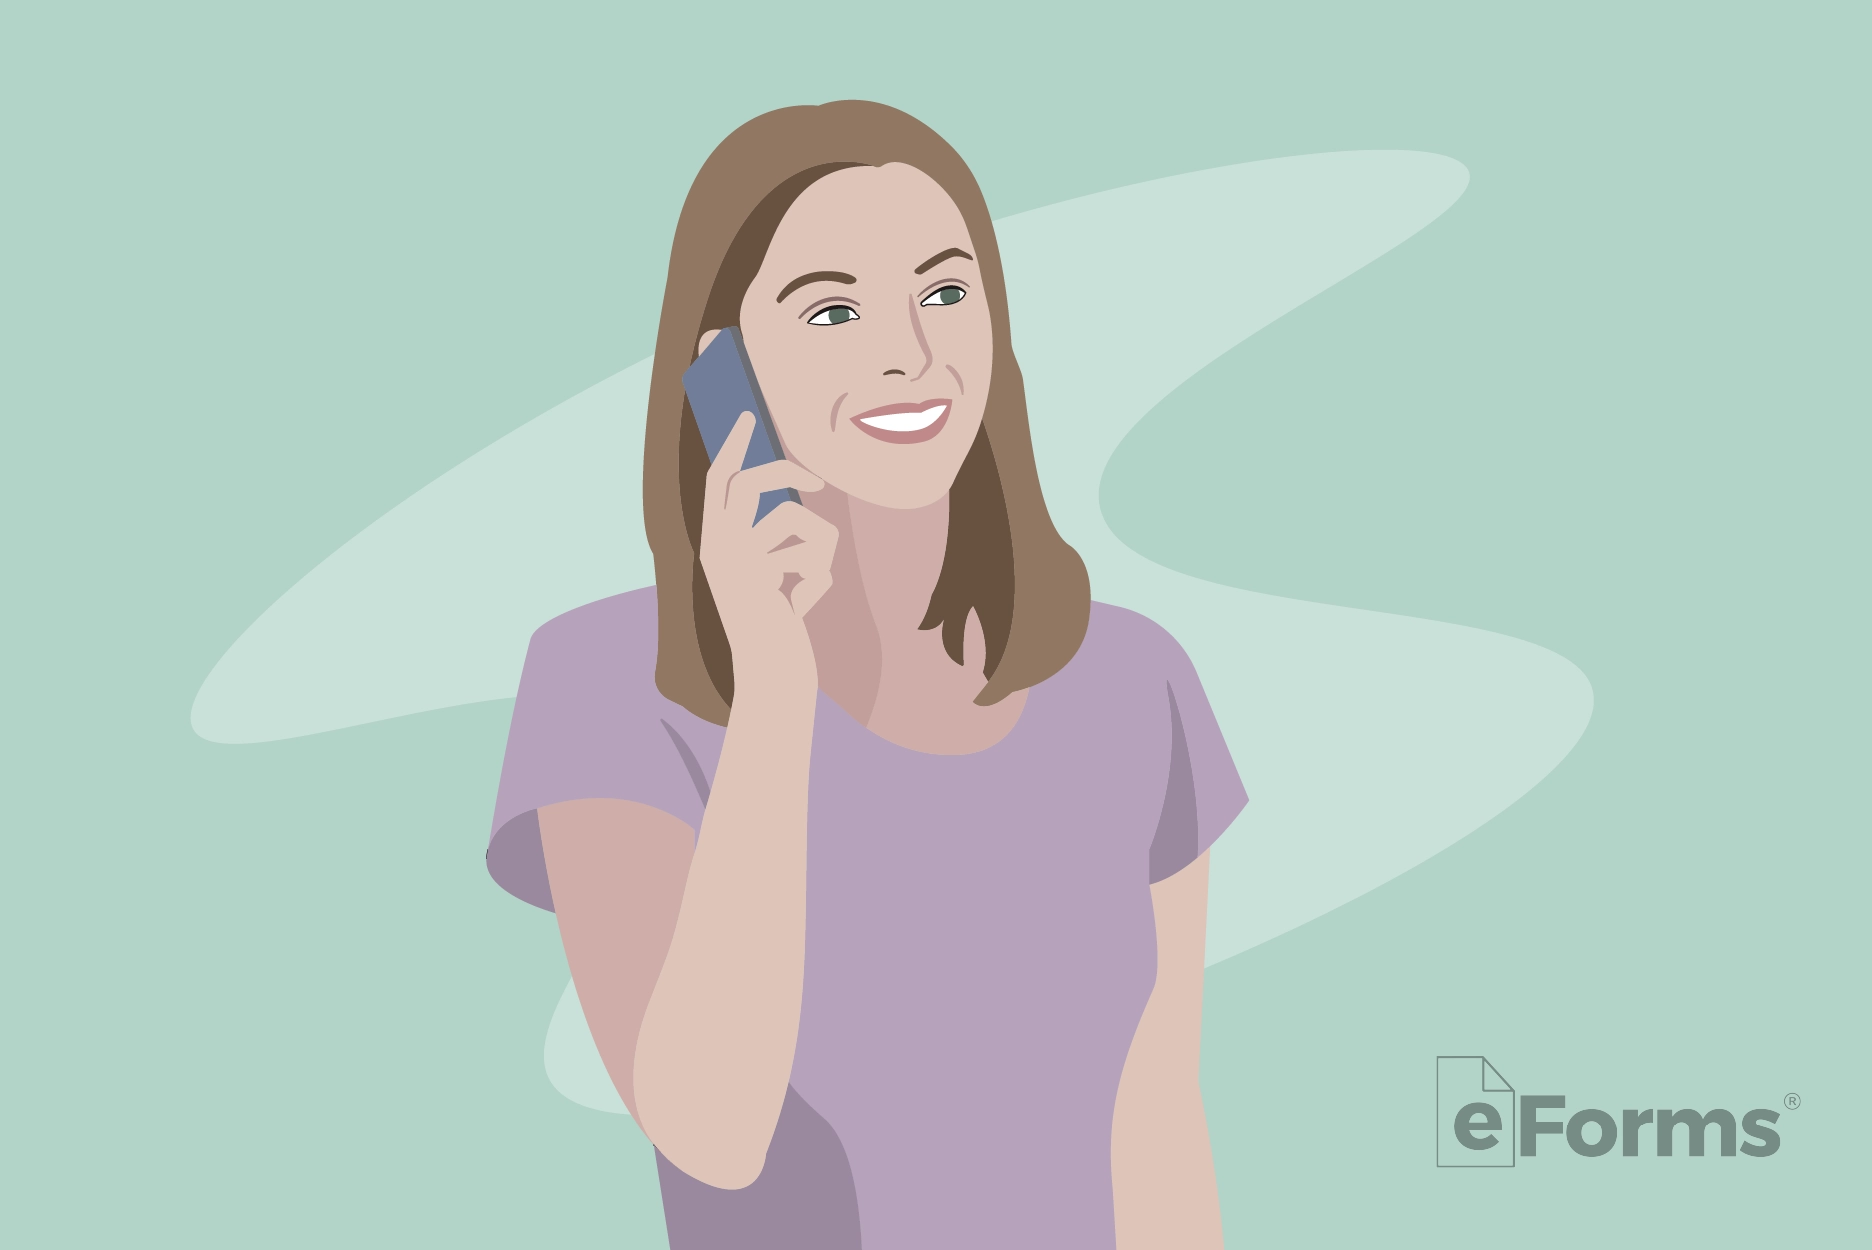 Woman standing holding smartphone to ear.